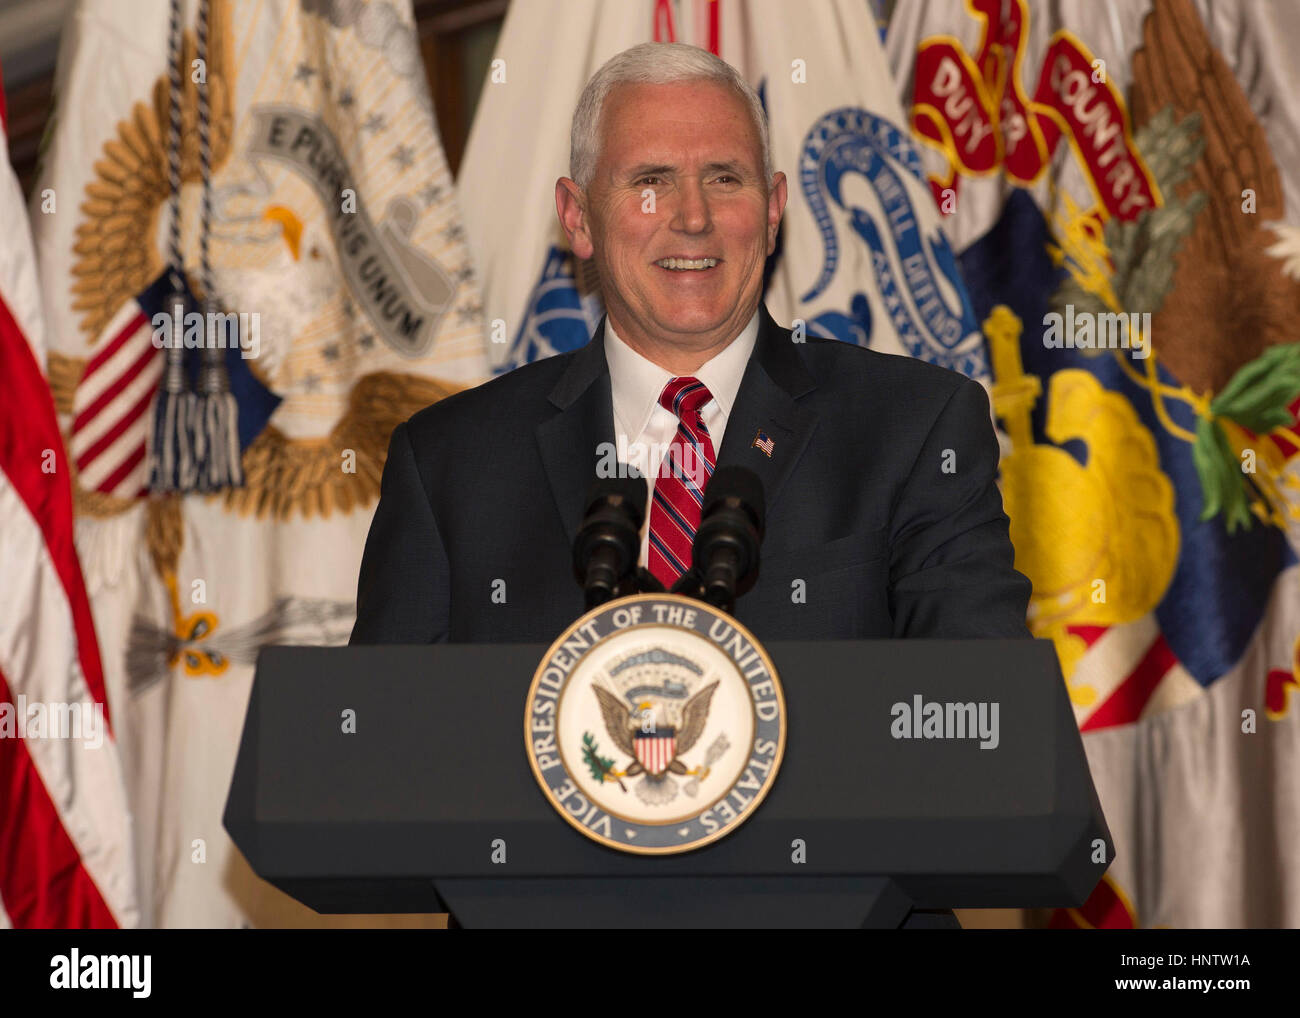 U.S. Vice President Mike Pence addresses the Corps of Cadets during the Flipper Dinner at the U.S. Military Academy February 9, 2017 in West Point, New York.  The annual dinner is held to commemorate the life of Henry O. Flipper, the first African-American graduate of West Point. (John Pellino/DOD Photo via Planetpix) Stock Photo